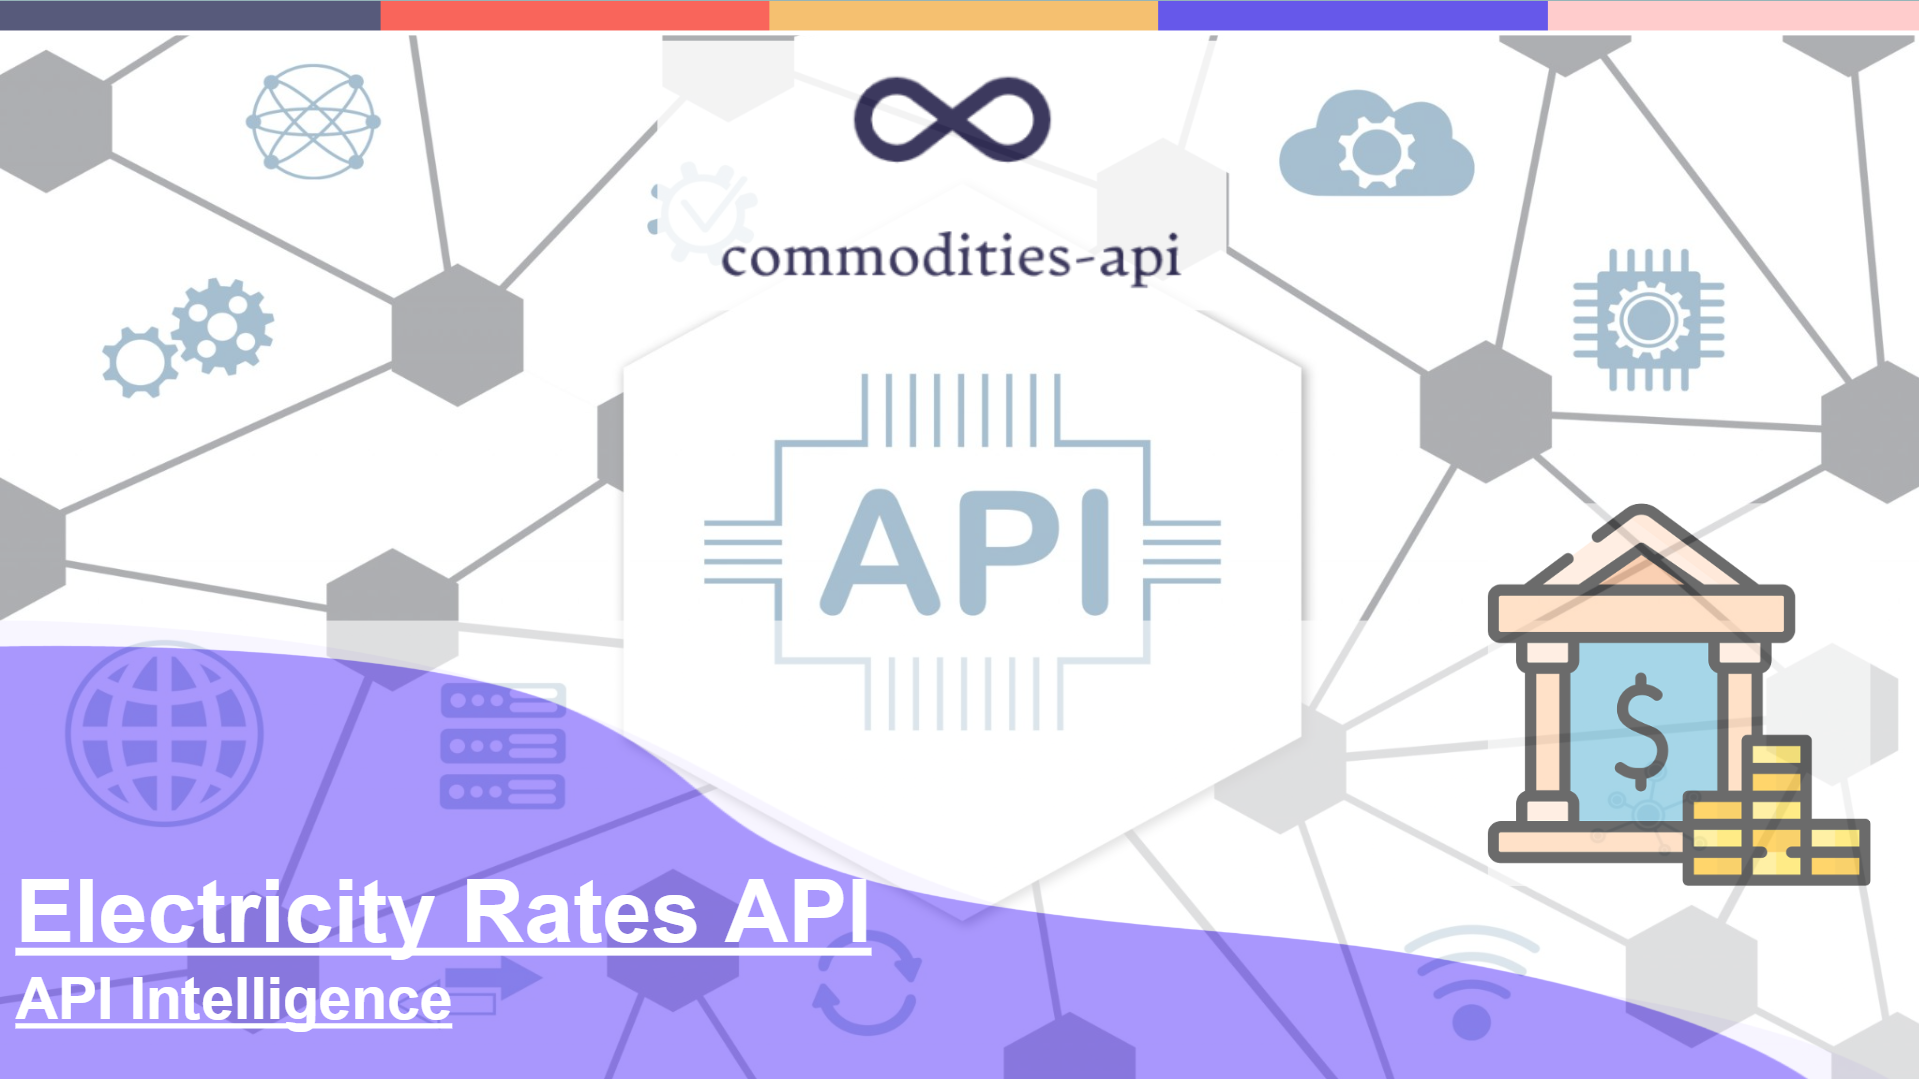 Navigate Electricity Rates With API Intelligence